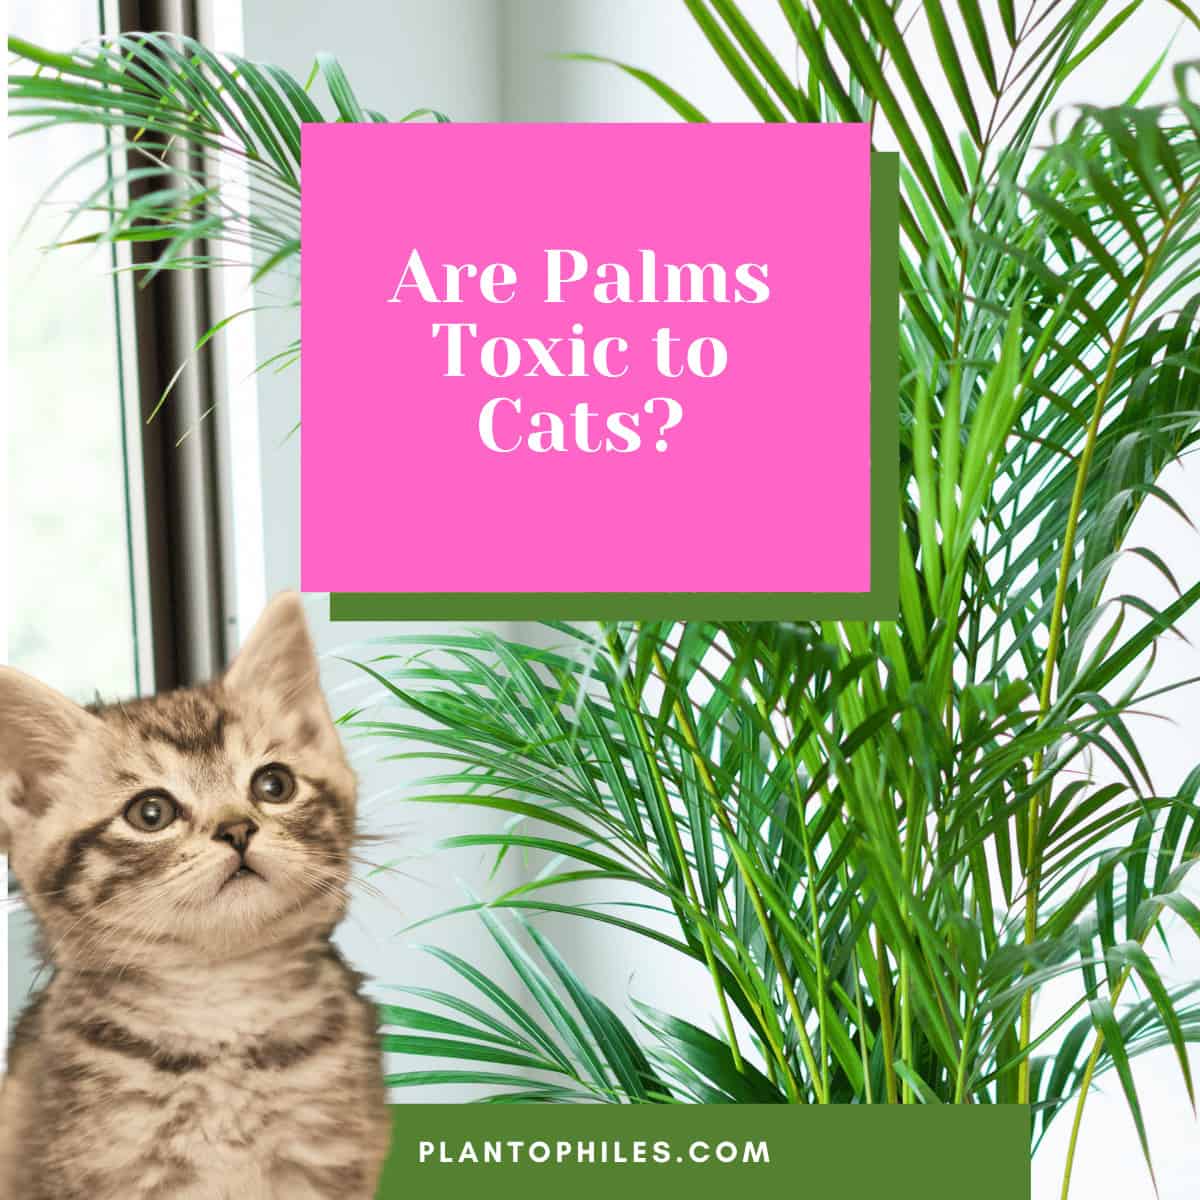 Are Palms Toxic to Cats?